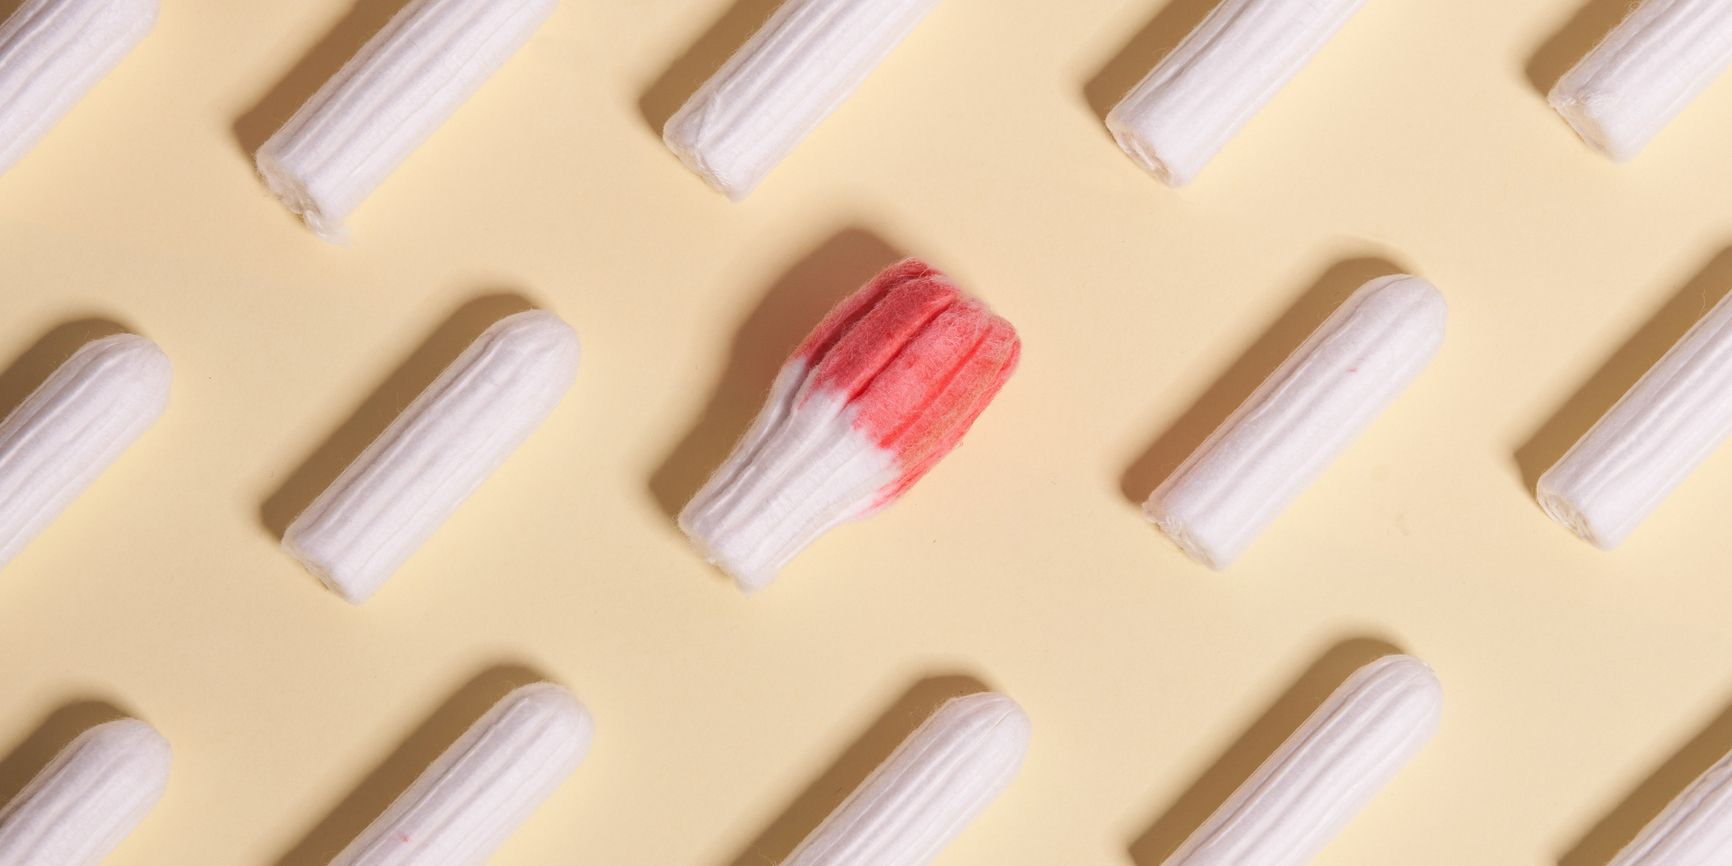 11 things you NEED to know about period